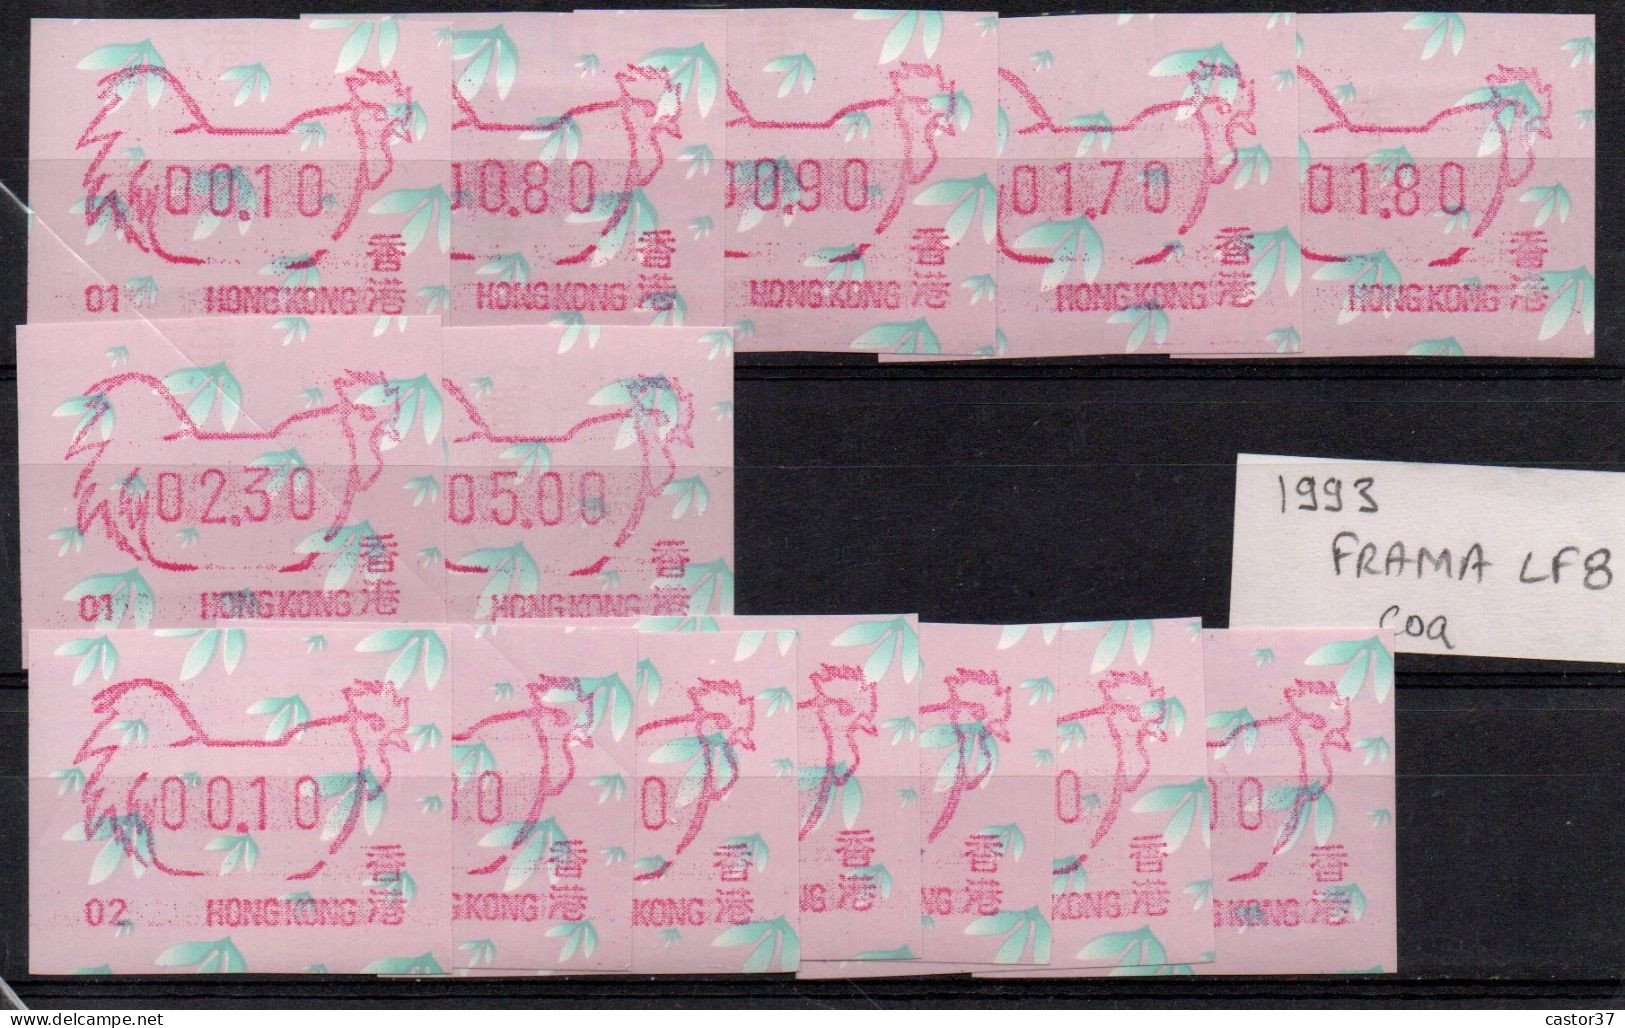 China Hong Kong Machine Label Frama 1993 Cock Machine 01 And 02 Complet Set Free Postage - Nuevos